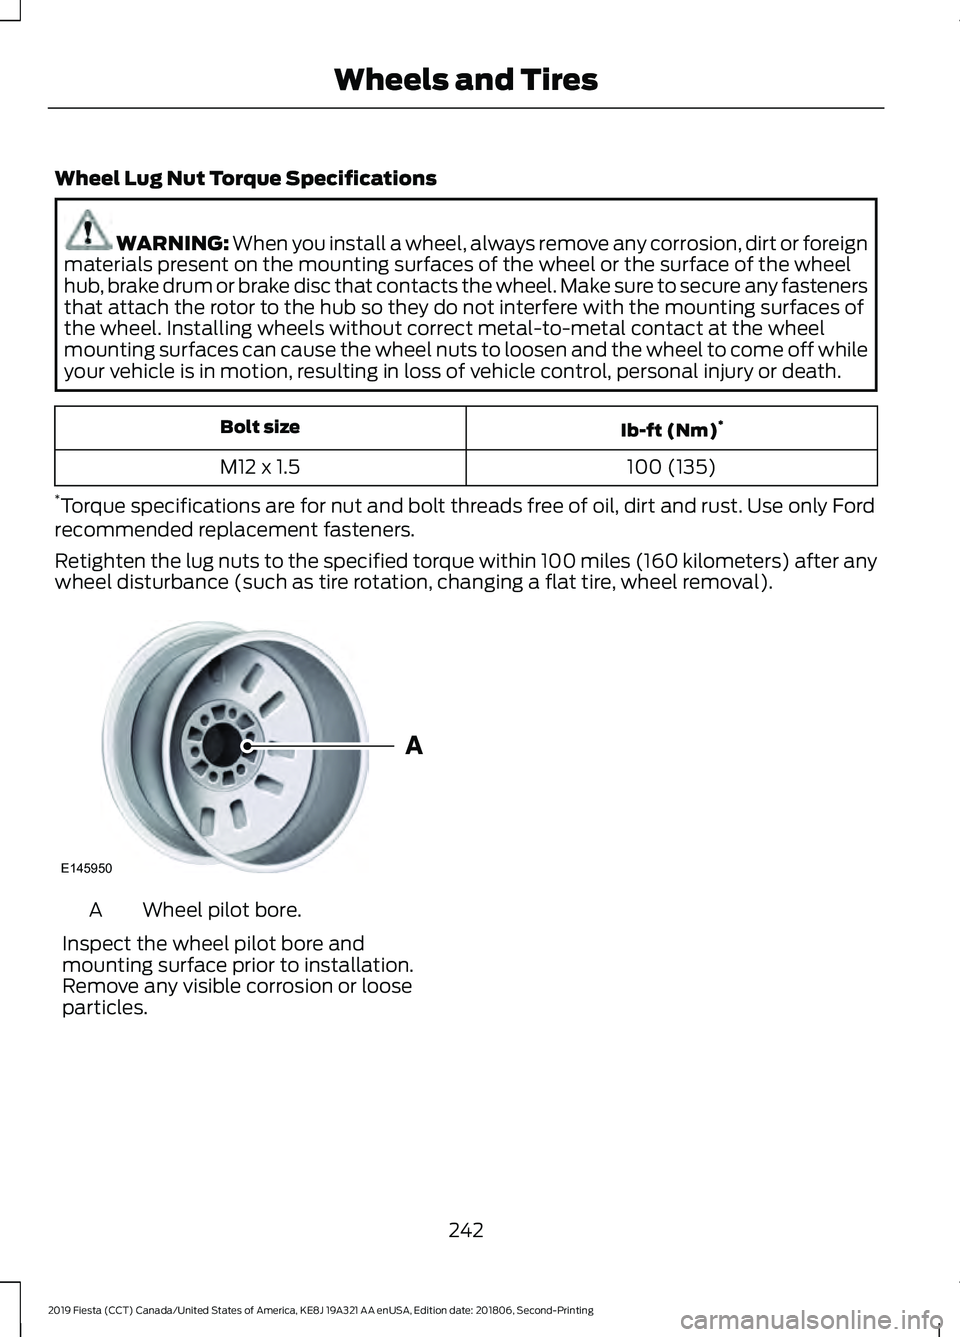 FORD FIESTA 2019  Owners Manual Wheel Lug Nut Torque Specifications
WARNING: When you install a wheel, always remove any corrosion, dirt or foreign
materials present on the mounting surfaces of the wheel or the surface of the wheel
